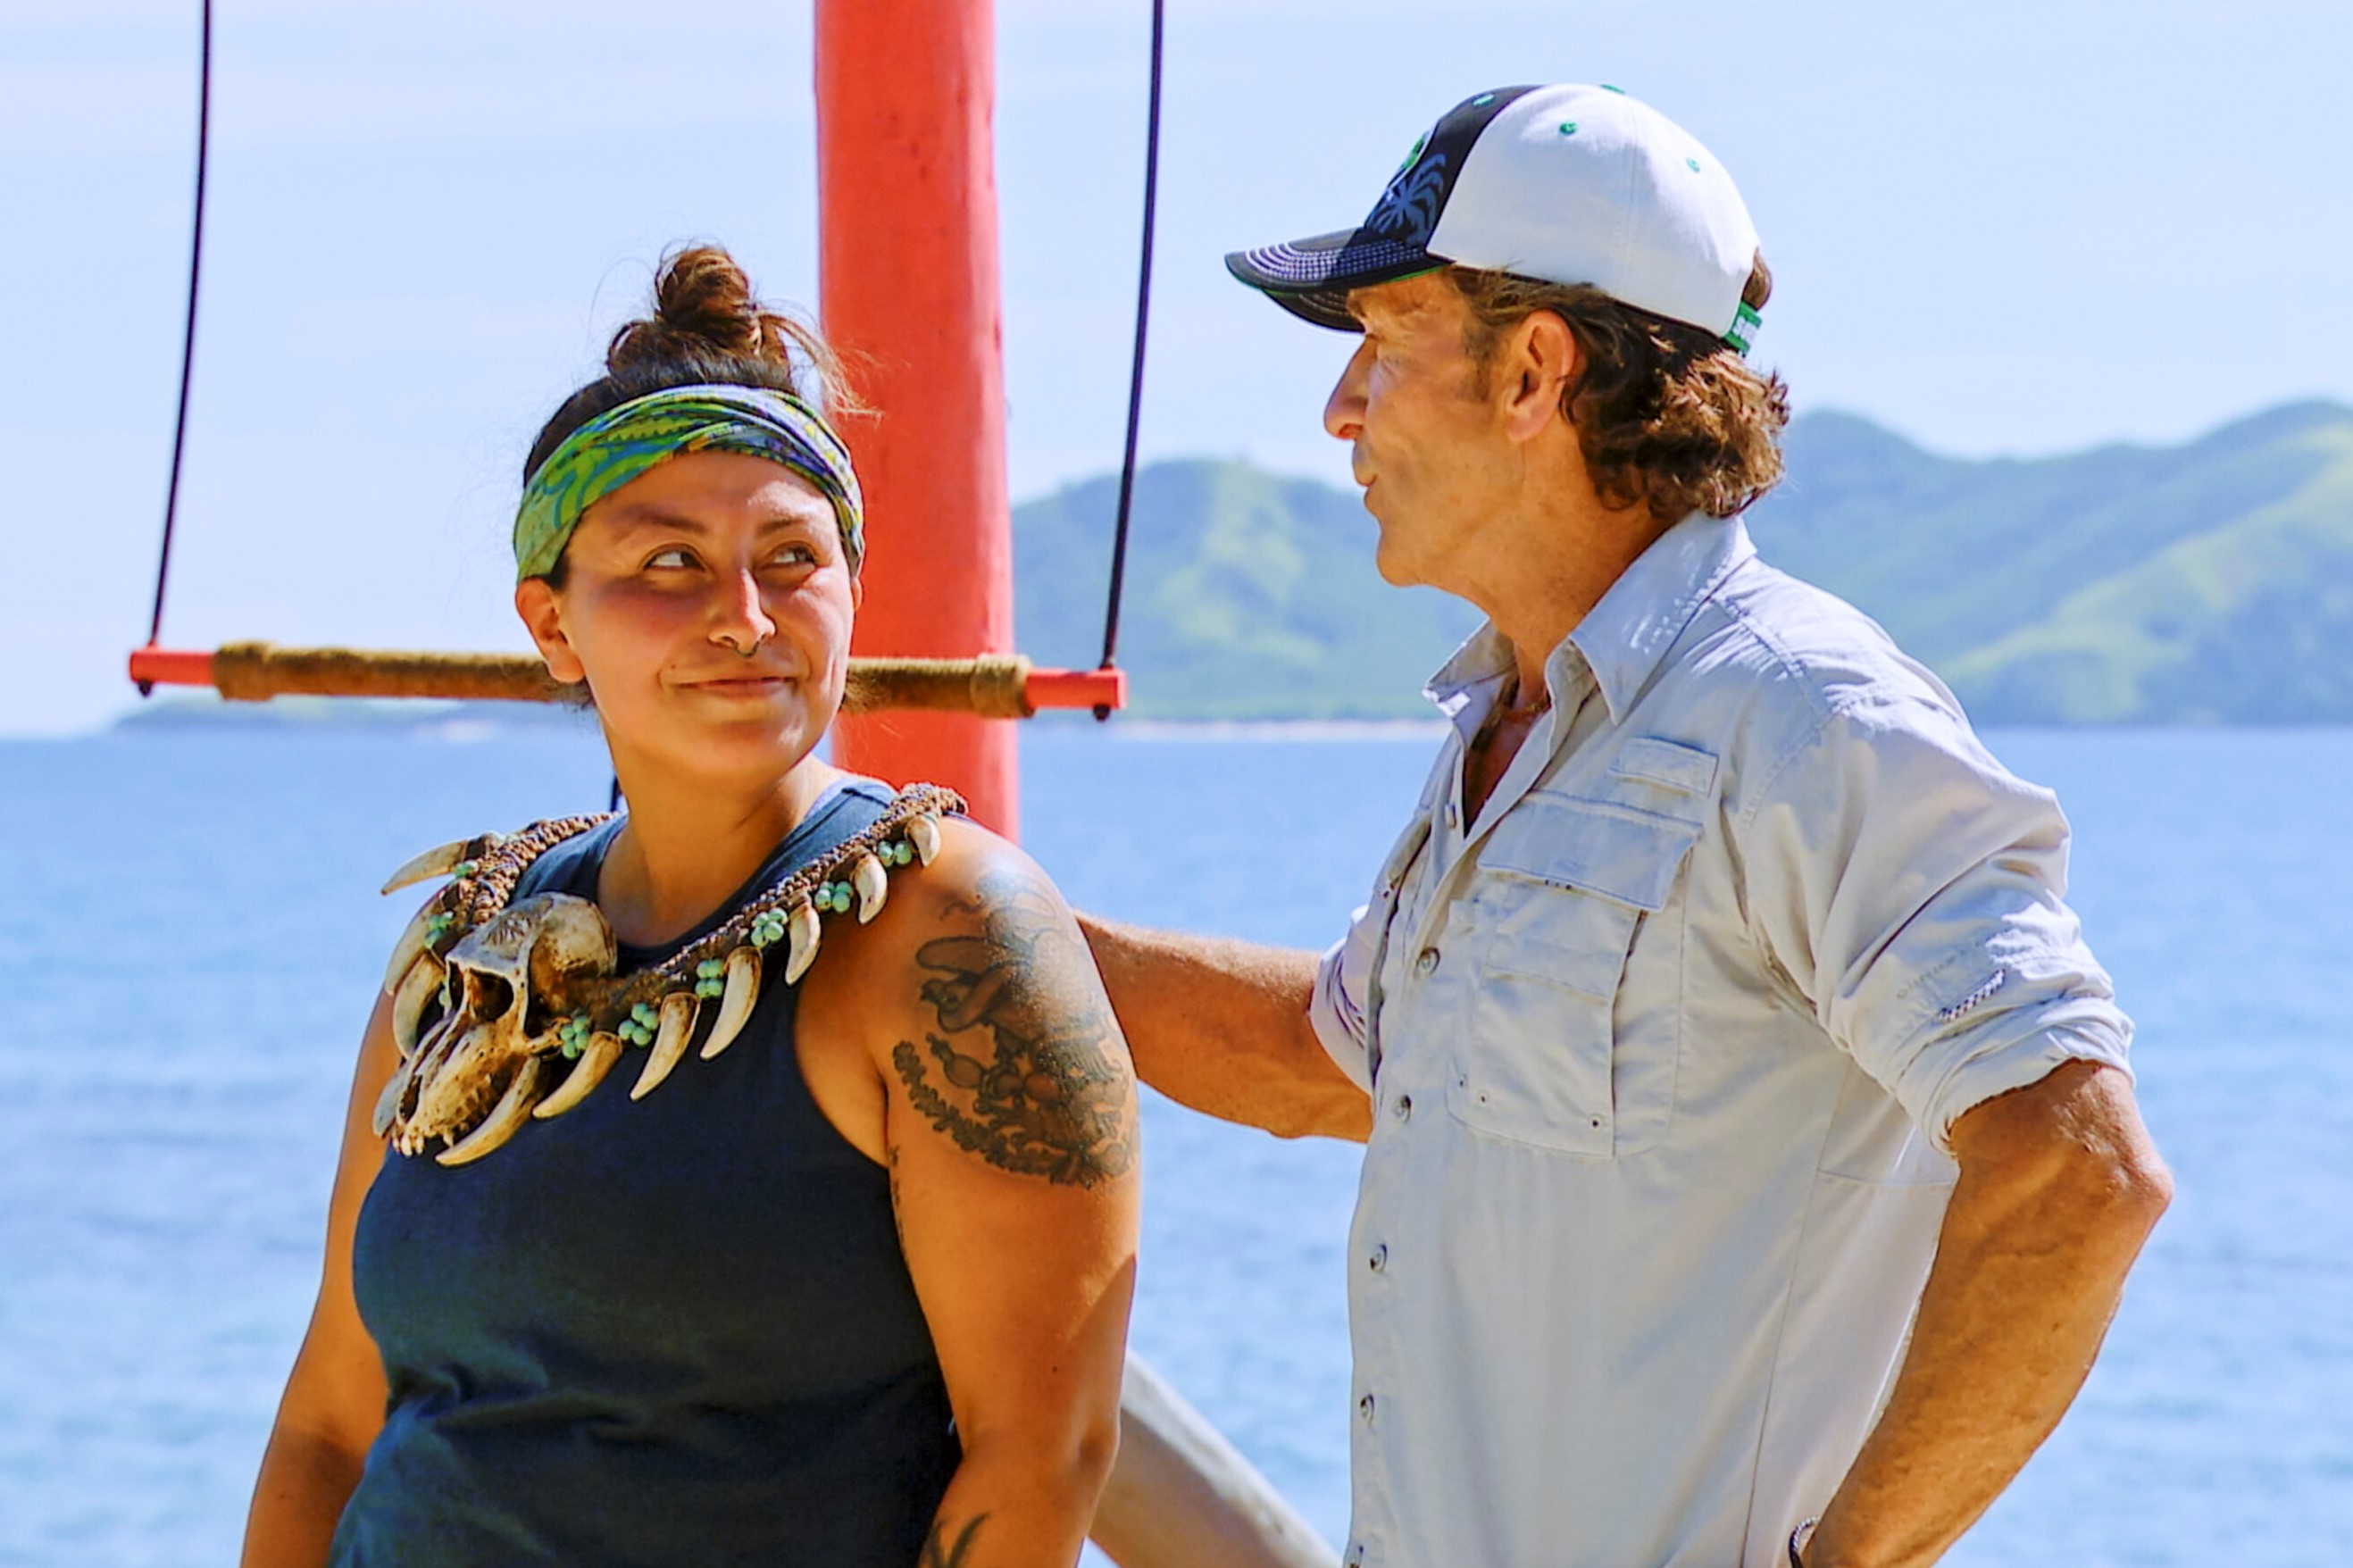 Karla Cruz Godoy and Jeff Probst, who star in 'Survivor' Season 43 on CBS, which has very few spoilers, appear in a episode. Jeff gives Karla the immunity necklace after she wins a challenge. Karla wears a dark blue tank top, the immunity necklace, and her green and blue 'Survivor' buff. Jeff wears a light gray button-up shirt with rolled-up sleeves and a black and white 'Survivor' baseball cap.